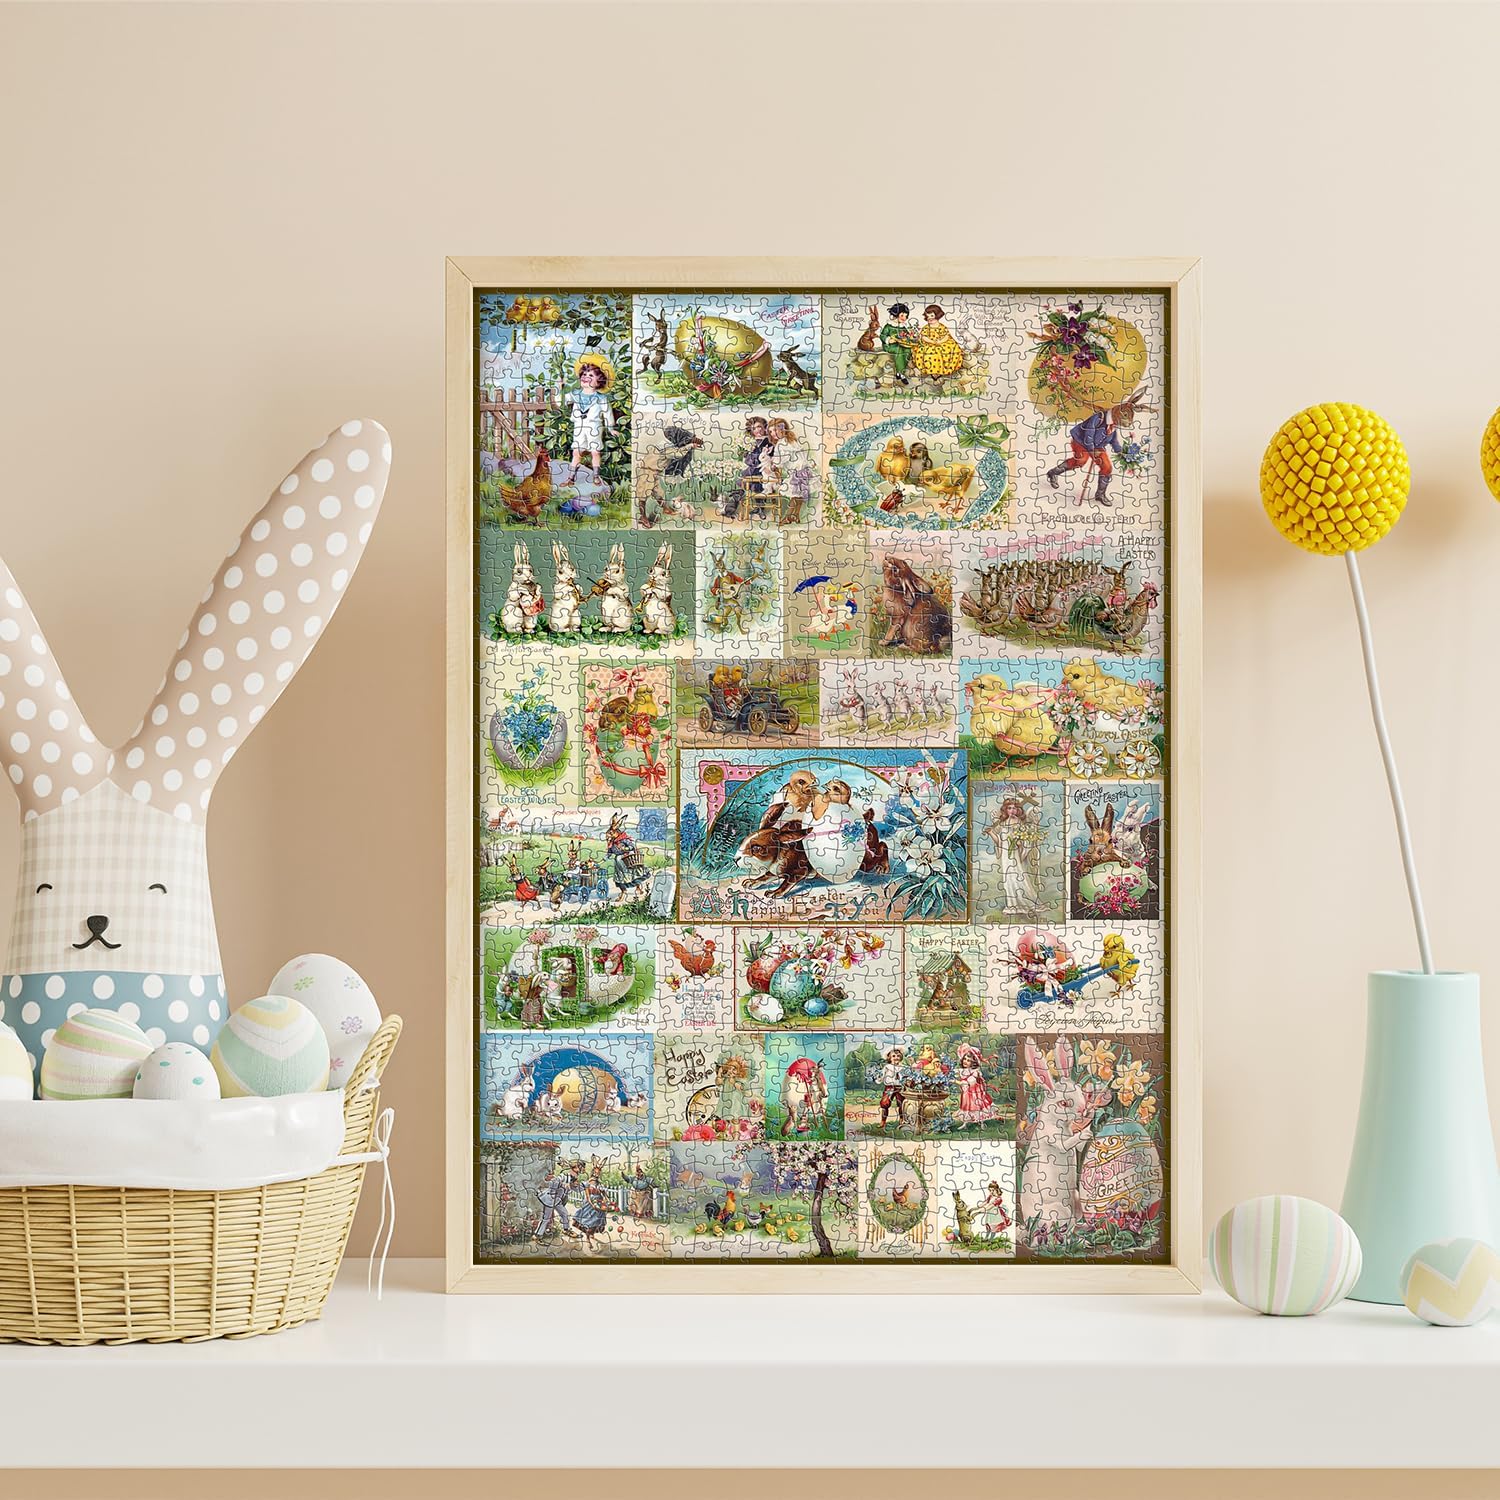 Retro Easter Collage Jigsaw Puzzles 1000 Pieces